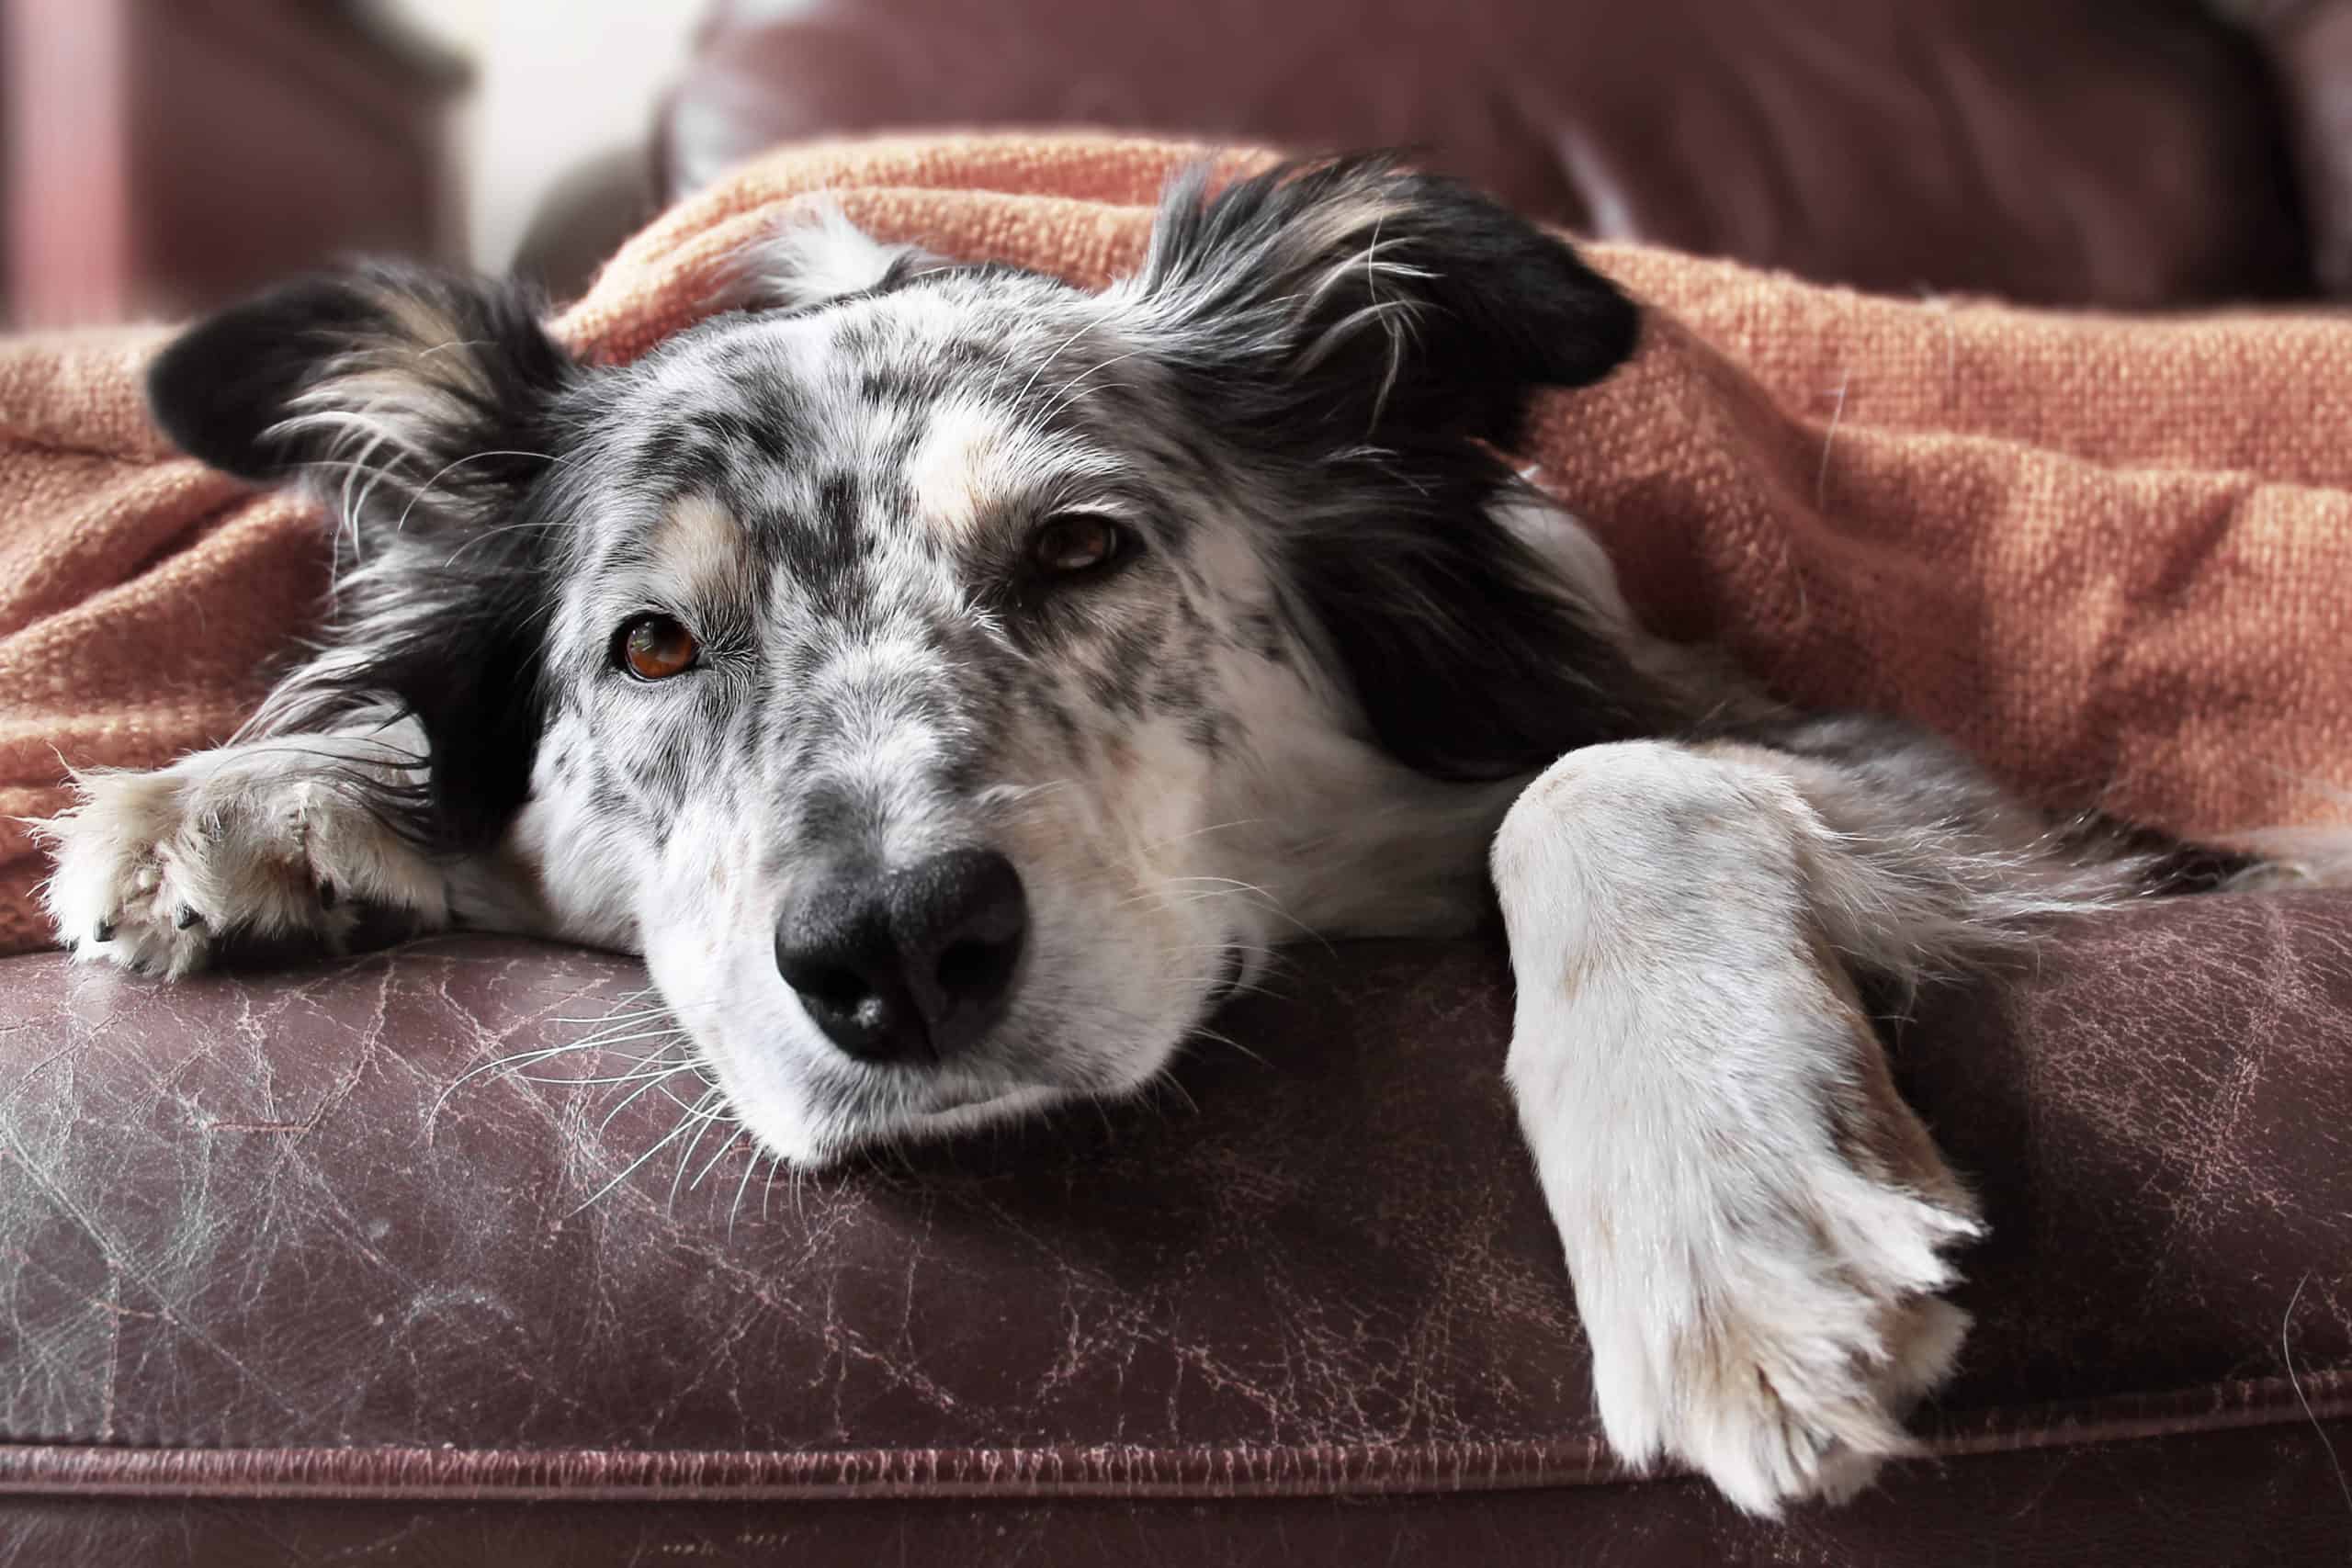 Do dogs smell when dying?